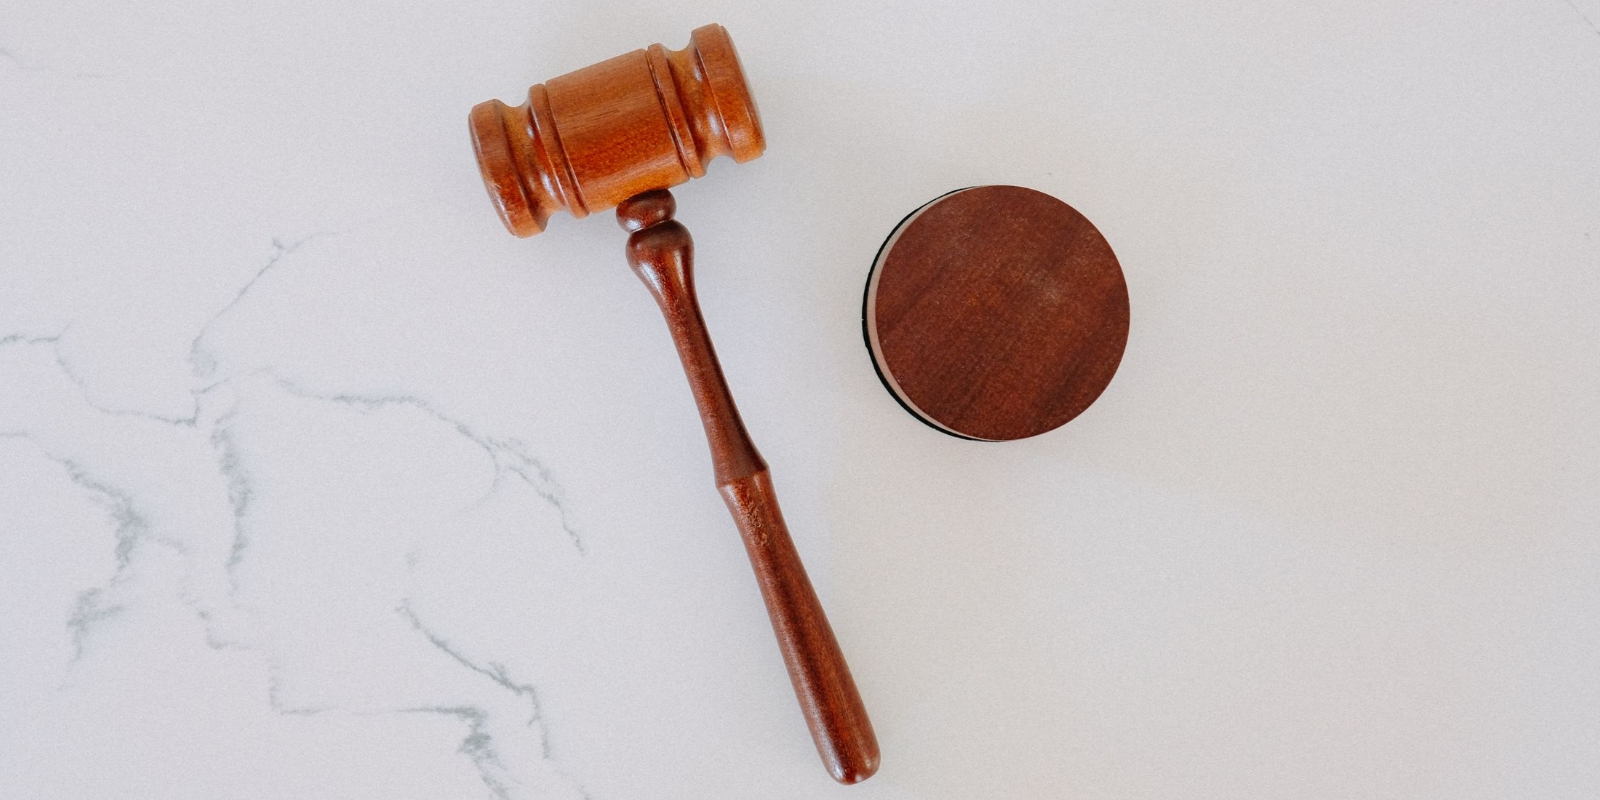 gavel on marble surface